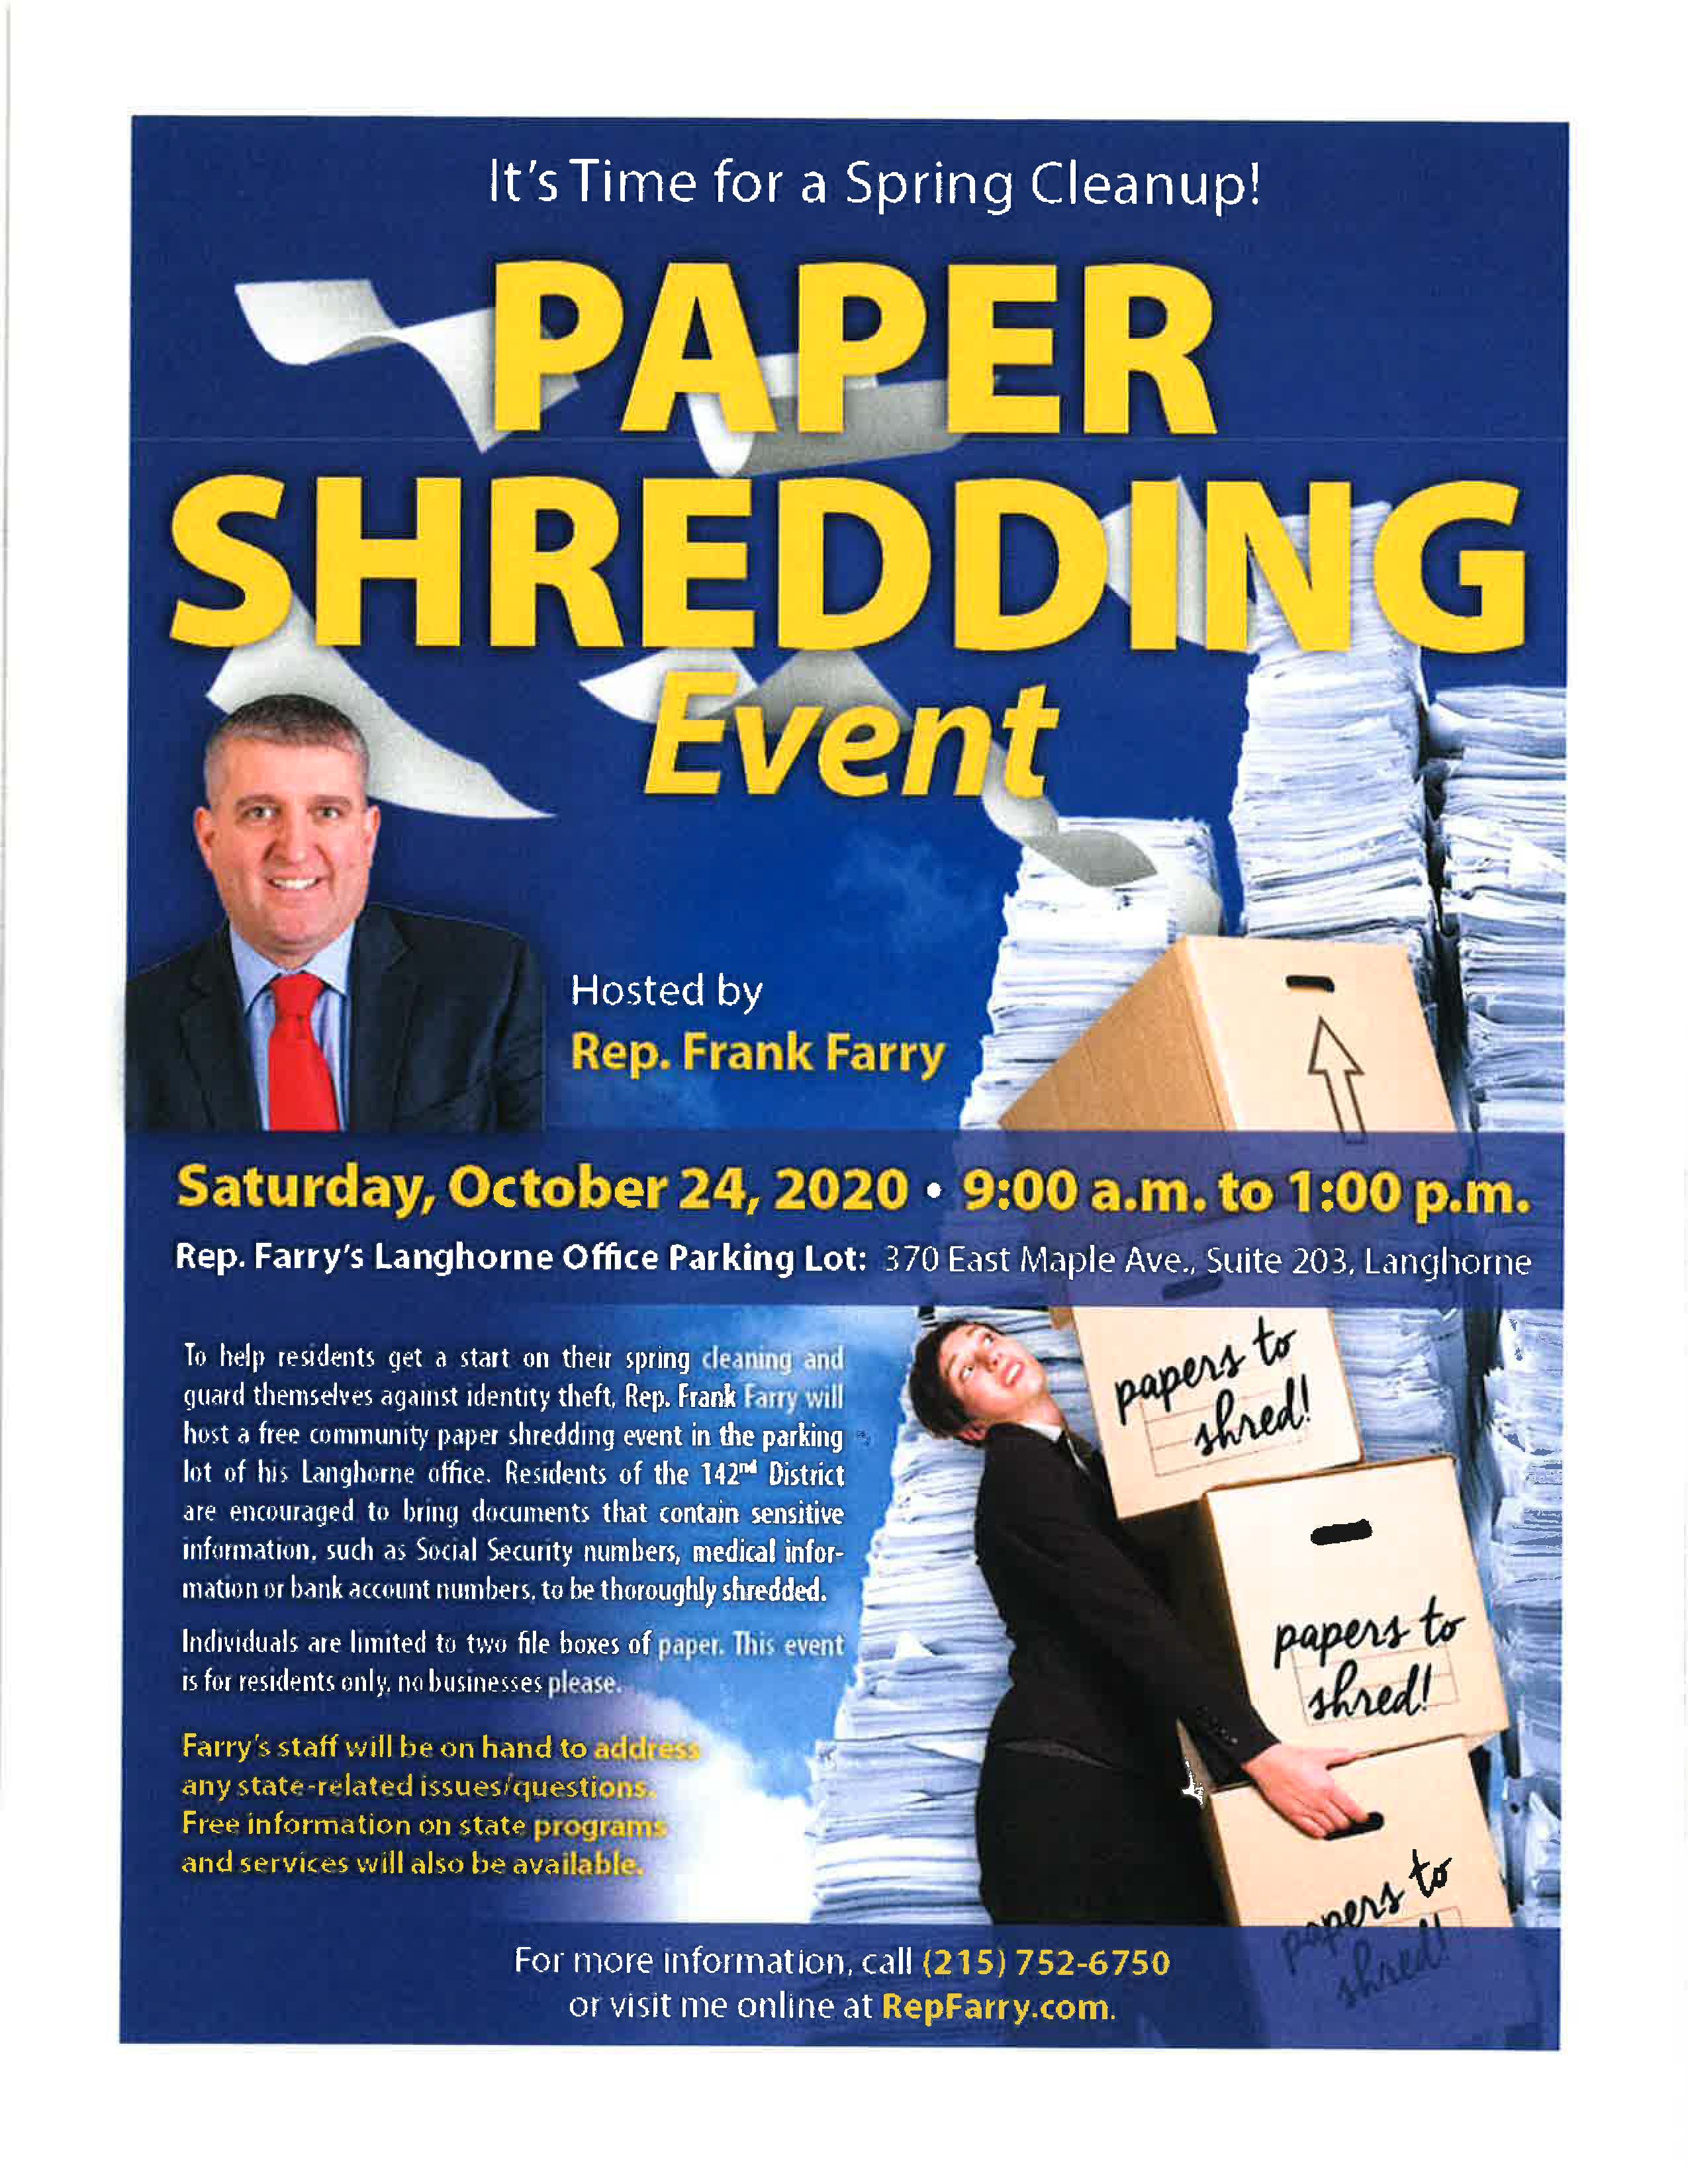 FREE Paper Shredding Event Hosted by Rep. Frank Farry Lower